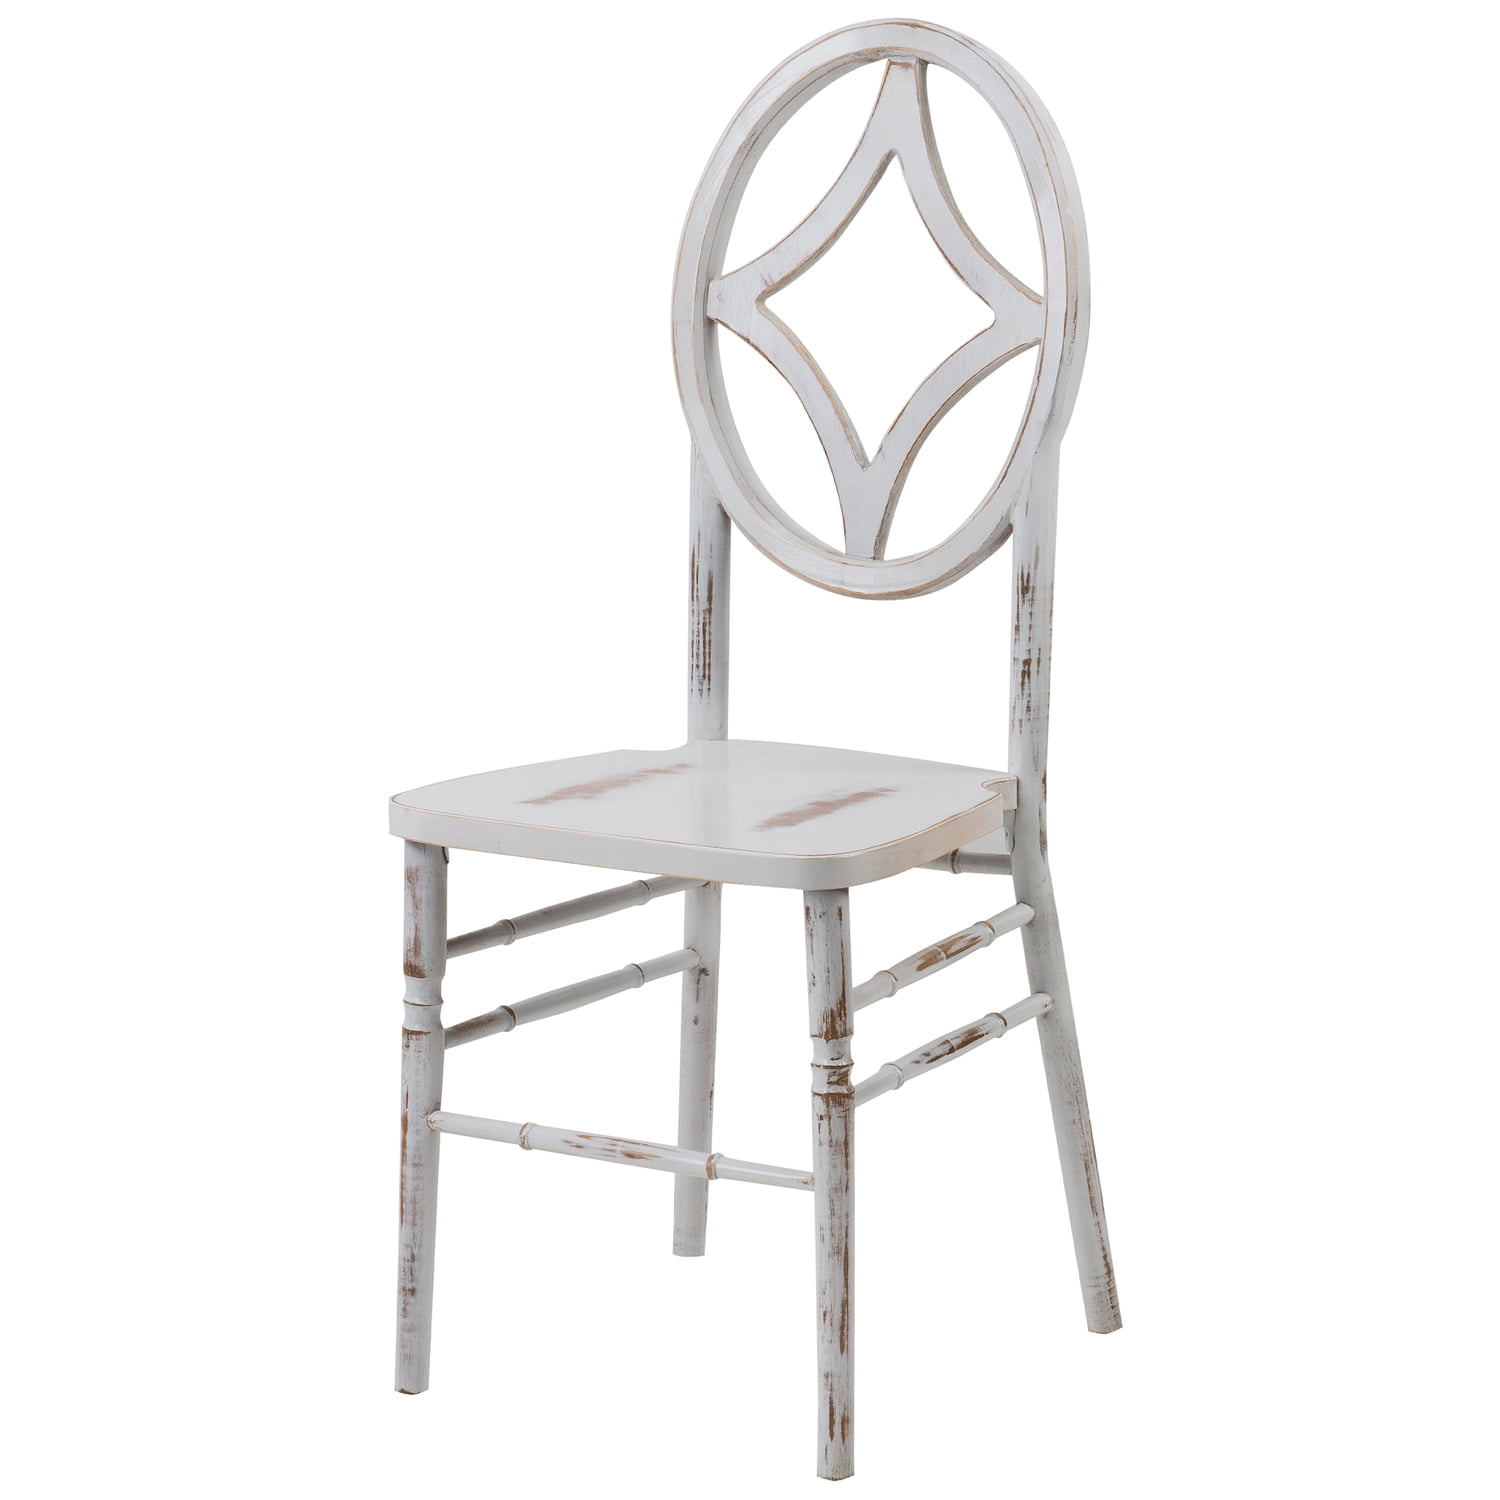 W-433-vr-diamond-lww Veronique Series Stackable Diamond Wood Dining Chair - Lime White Wash - 38.75 In.